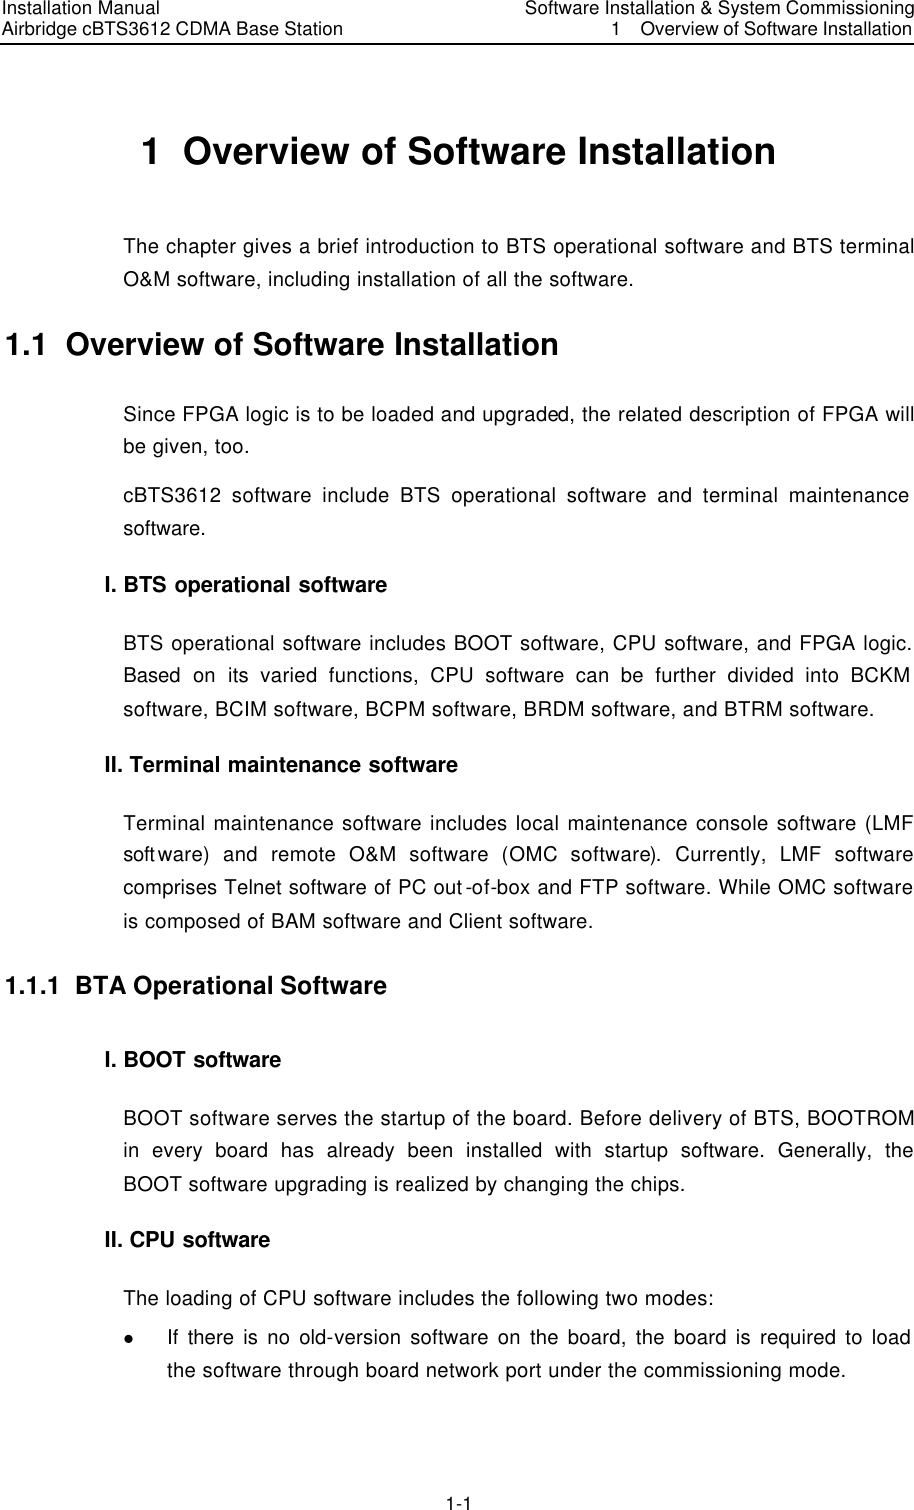 Installation Manual   Airbridge cBTS3612 CDMA Base Station  　Software Installation &amp; System Commissioning 1  Overview of Software Installation　1-1　1  Overview of Software Installation   The chapter gives a brief introduction to BTS operational software and BTS terminal O&amp;M software, including installation of all the software. 1.1  Overview of Software Installation   Since FPGA logic is to be loaded and upgraded, the related description of FPGA will be given, too.   cBTS3612 software include BTS operational software and terminal maintenance software. I. BTS operational software BTS operational software includes BOOT software, CPU software, and FPGA logic. Based on its varied functions, CPU software can be further divided into BCKM software, BCIM software, BCPM software, BRDM software, and BTRM software.   II. Terminal maintenance software   Terminal maintenance software includes local maintenance console software (LMF software) and remote O&amp;M software (OMC software). Currently, LMF software comprises Telnet software of PC out-of-box and FTP software. While OMC software is composed of BAM software and Client software. 1.1.1  BTA Operational Software I. BOOT software BOOT software serves the startup of the board. Before delivery of BTS, BOOTROM in every board has already been installed with startup software. Generally, the BOOT software upgrading is realized by changing the chips. II. CPU software The loading of CPU software includes the following two modes: l If there is no old-version software on the board, the board is required to load the software through board network port under the commissioning mode.   